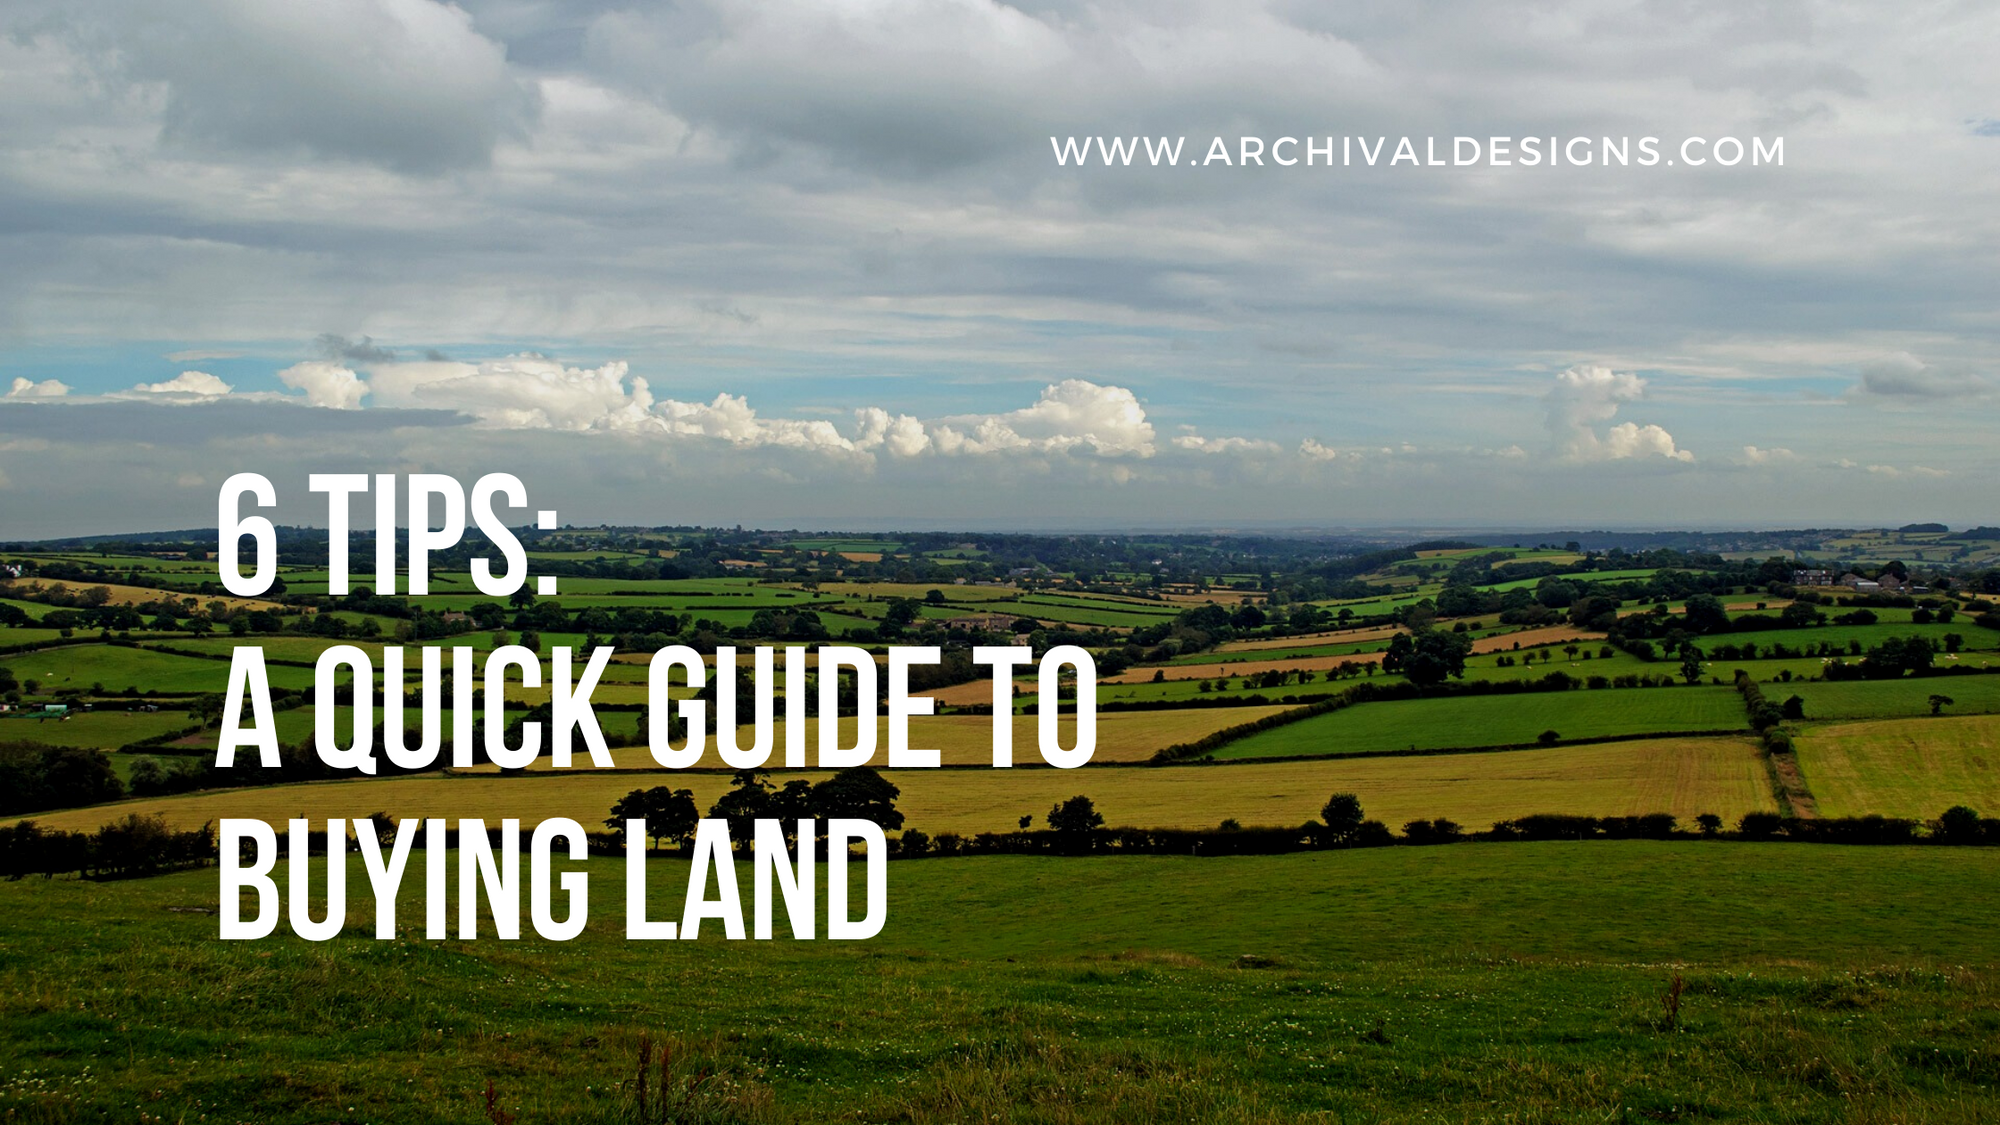 6 Tips: A Quick Guide to Buying Land